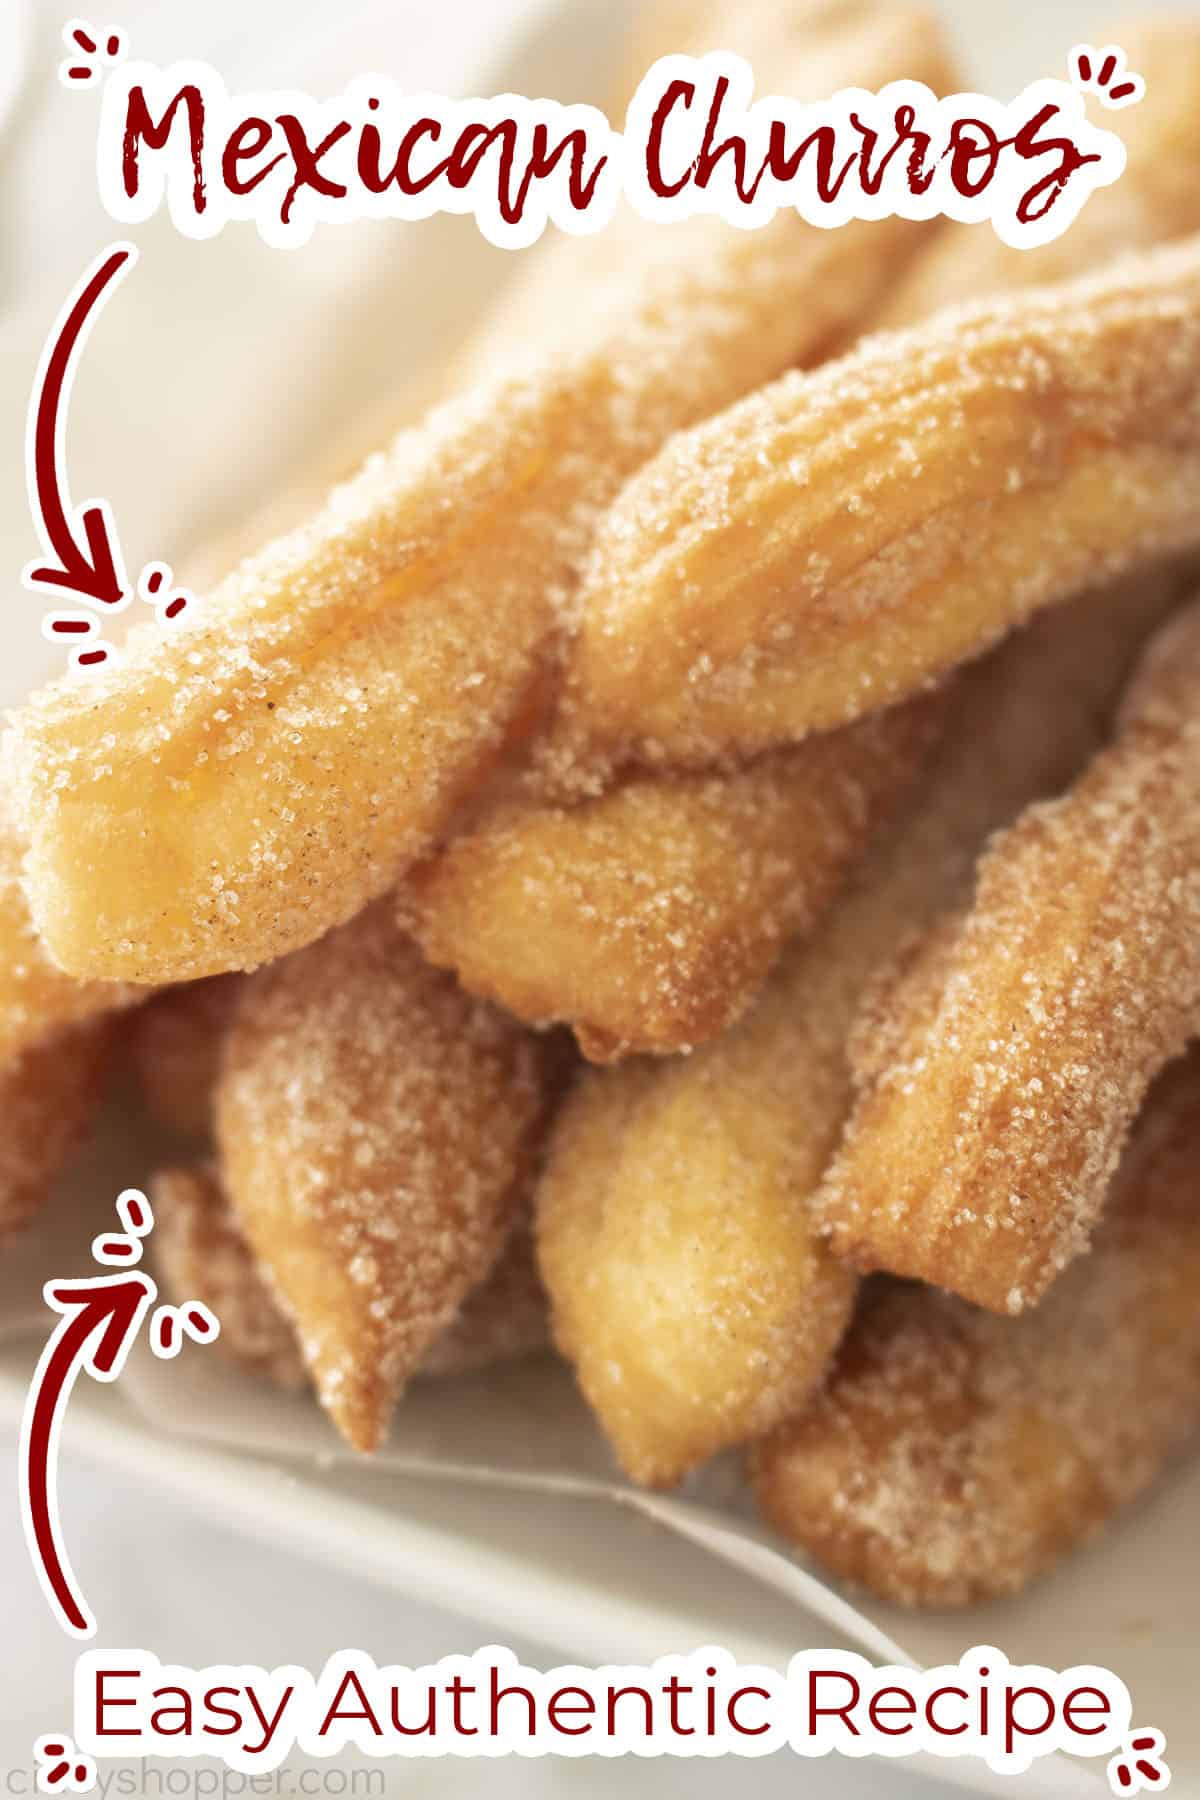 Text on image Mexican Churros - Easy Authentic Recipe.